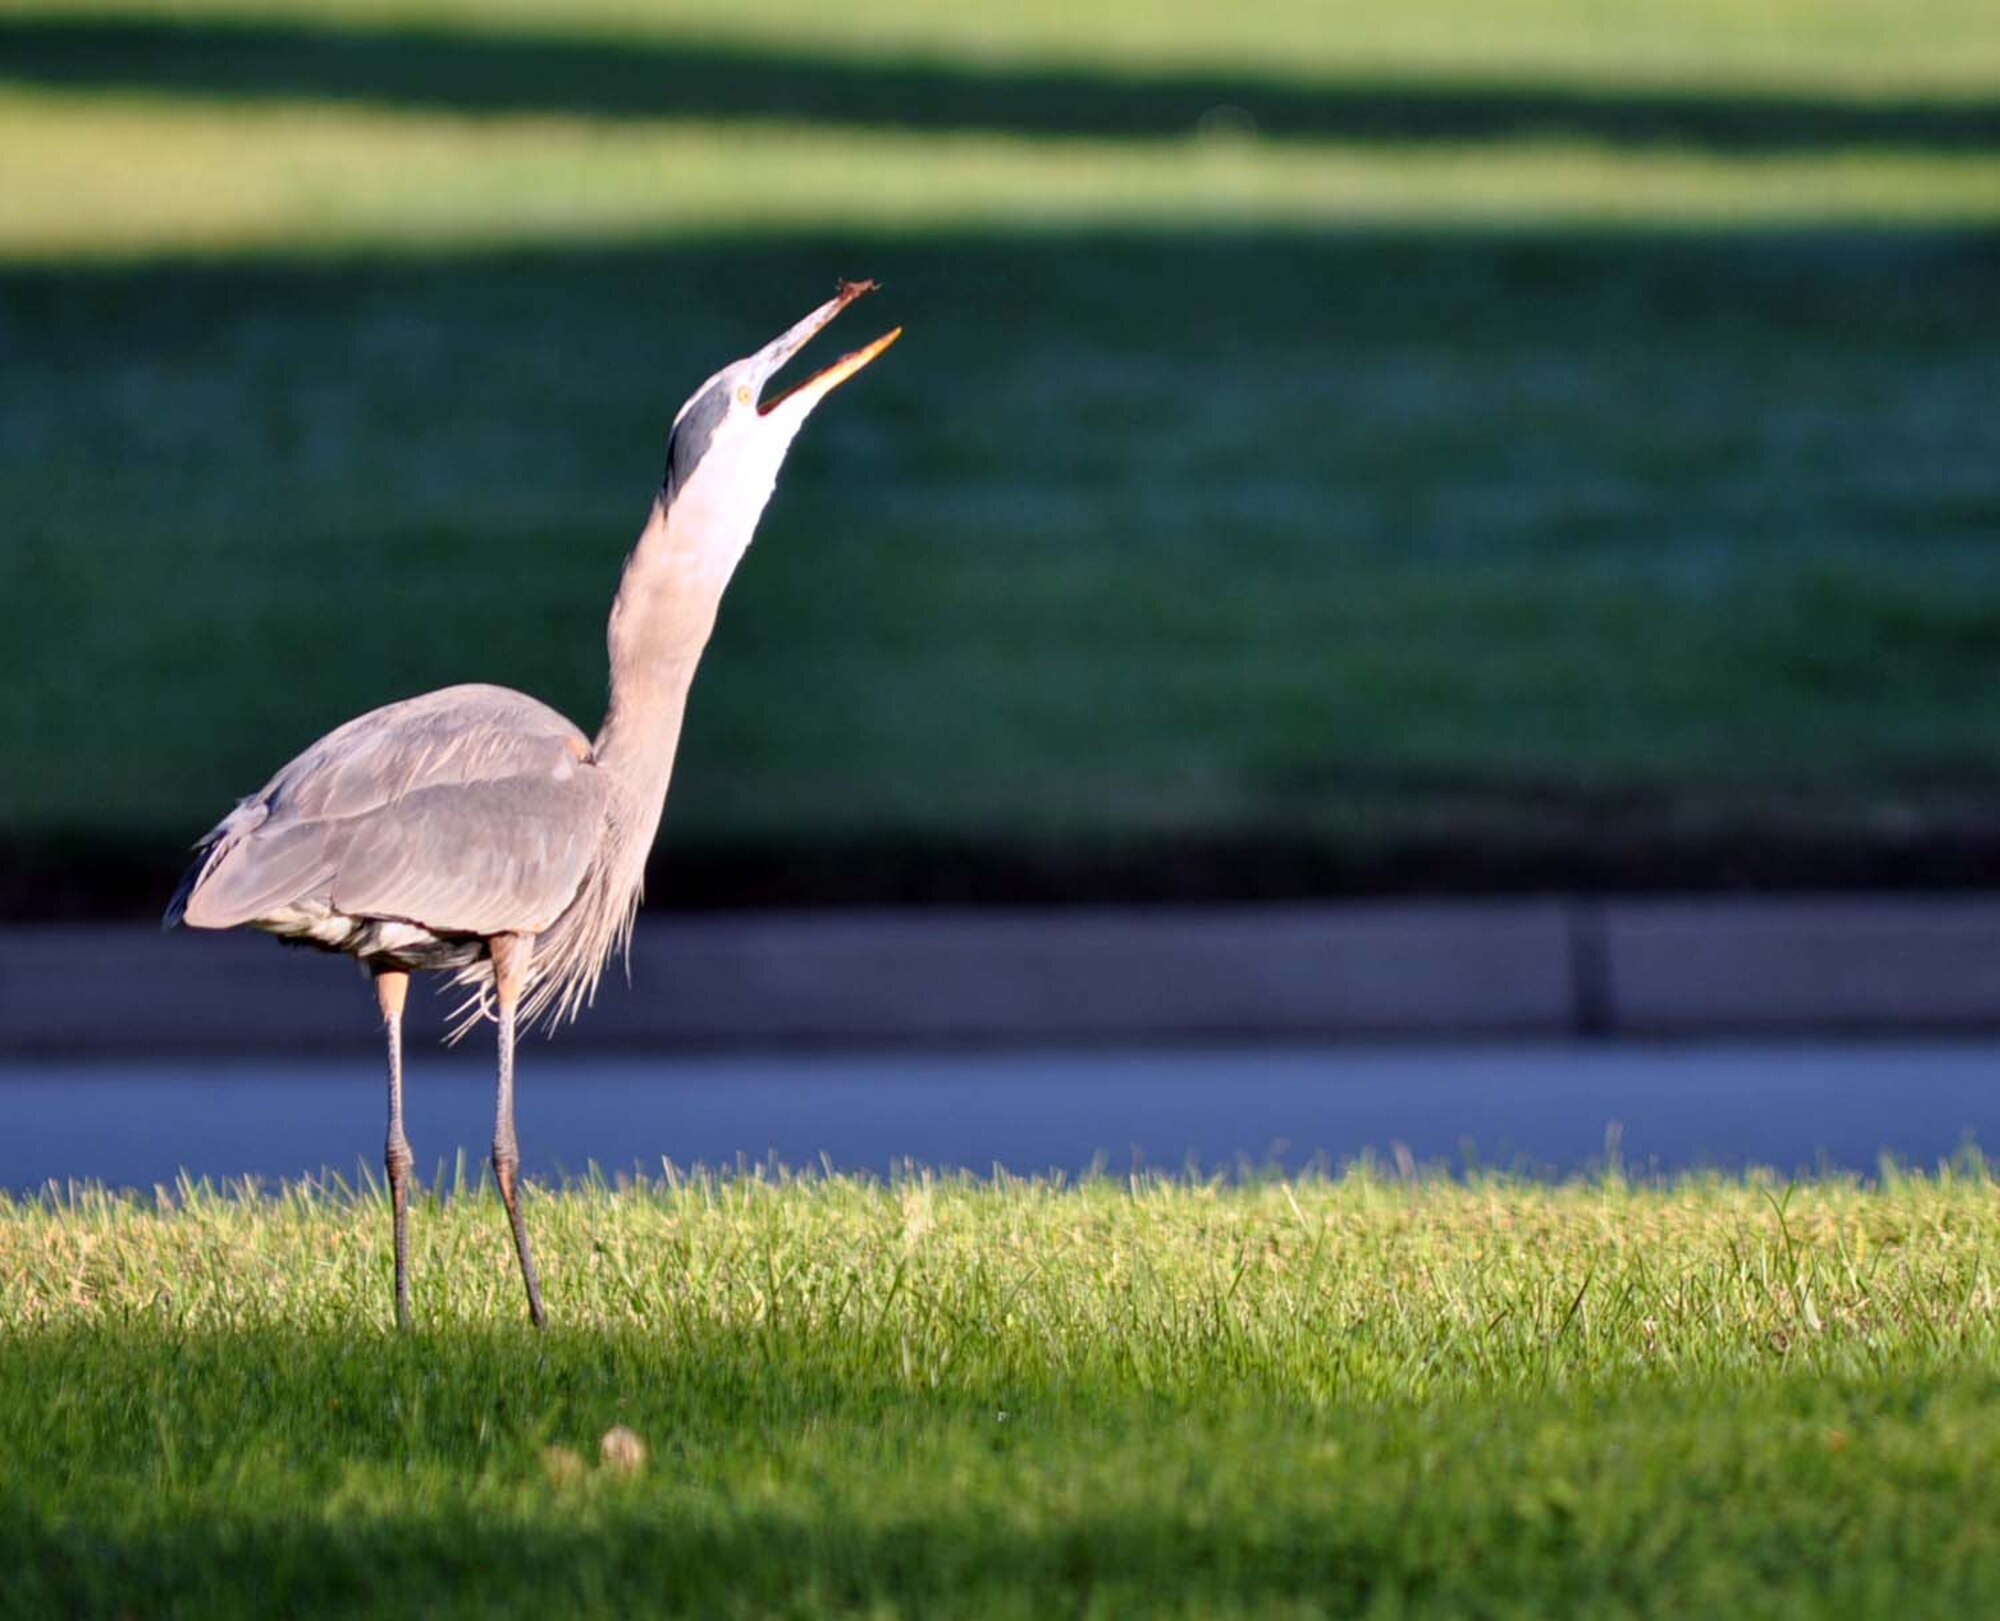 The Great Blue Heron stretches its neck as it swallows a rat after catching it near the parade field at March Air Reserve Base, Calif. This protected species of migratory bird is spotted in various locations on base throughout the day and does its best to help control the rodent population here.  (U.S. Air Force photo by Linda Welz)
